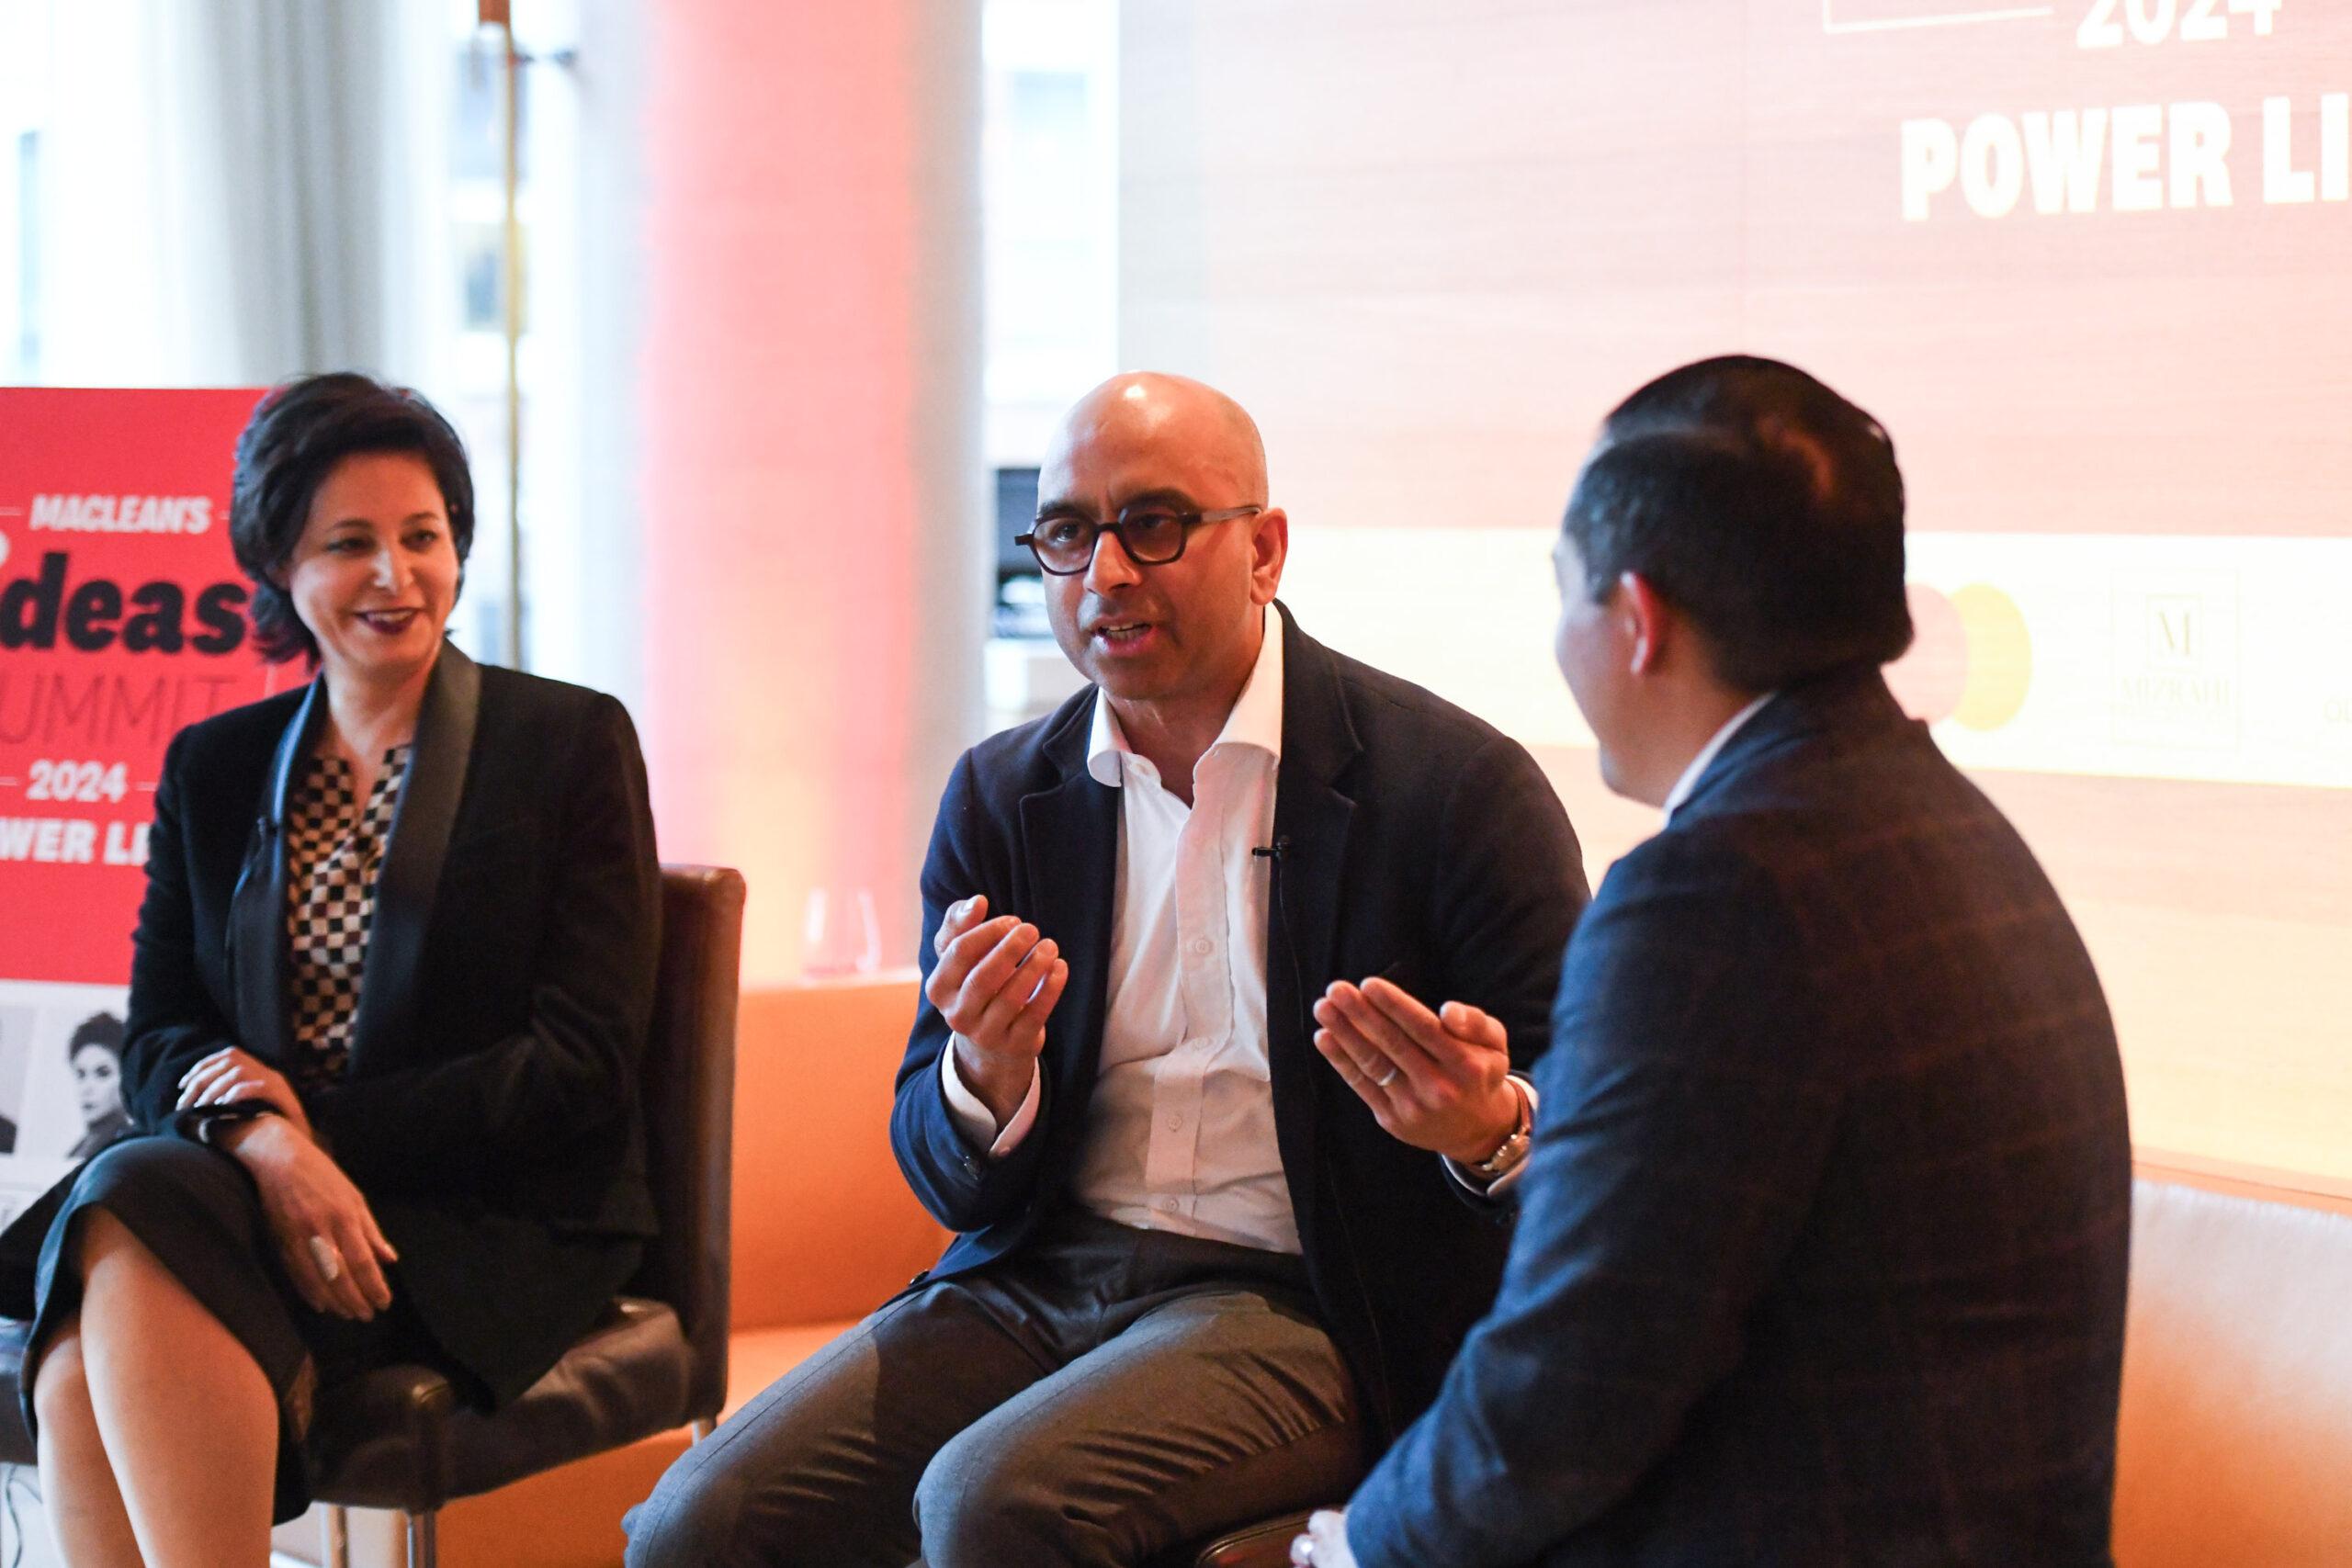 Marie Henein, a prominent criminal defence lawyer, and Randy Boyagoda, vice-dean of the Faculty of Arts and Science at the University of Toronto, during the marquee panel hosted by Jason Maghanoy, publisher of Macleanâs